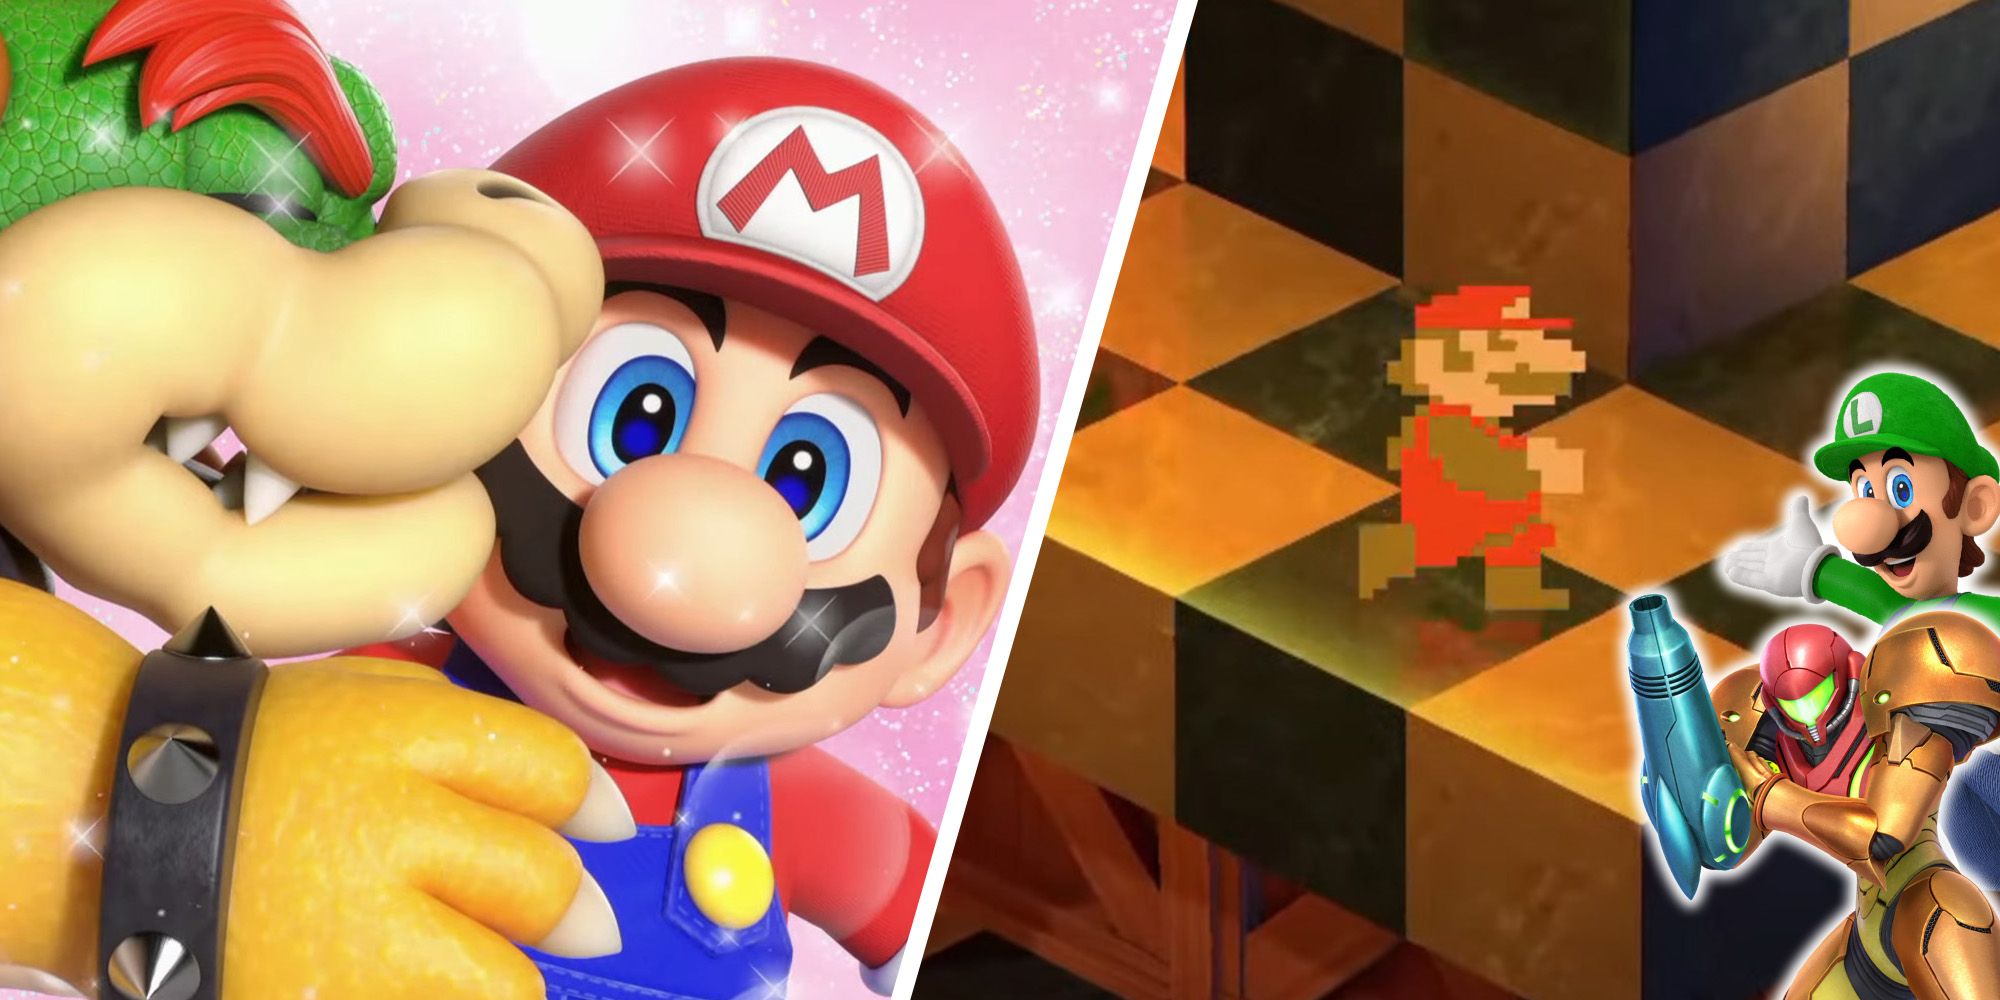 Super Mario RPG Easter Eggs And Hidden Details - Split image of Bowser kissing Mario during Booster's wedding, 8-Bit Mario running through Booster's Tower, and Samus from Metroid next to Luigi